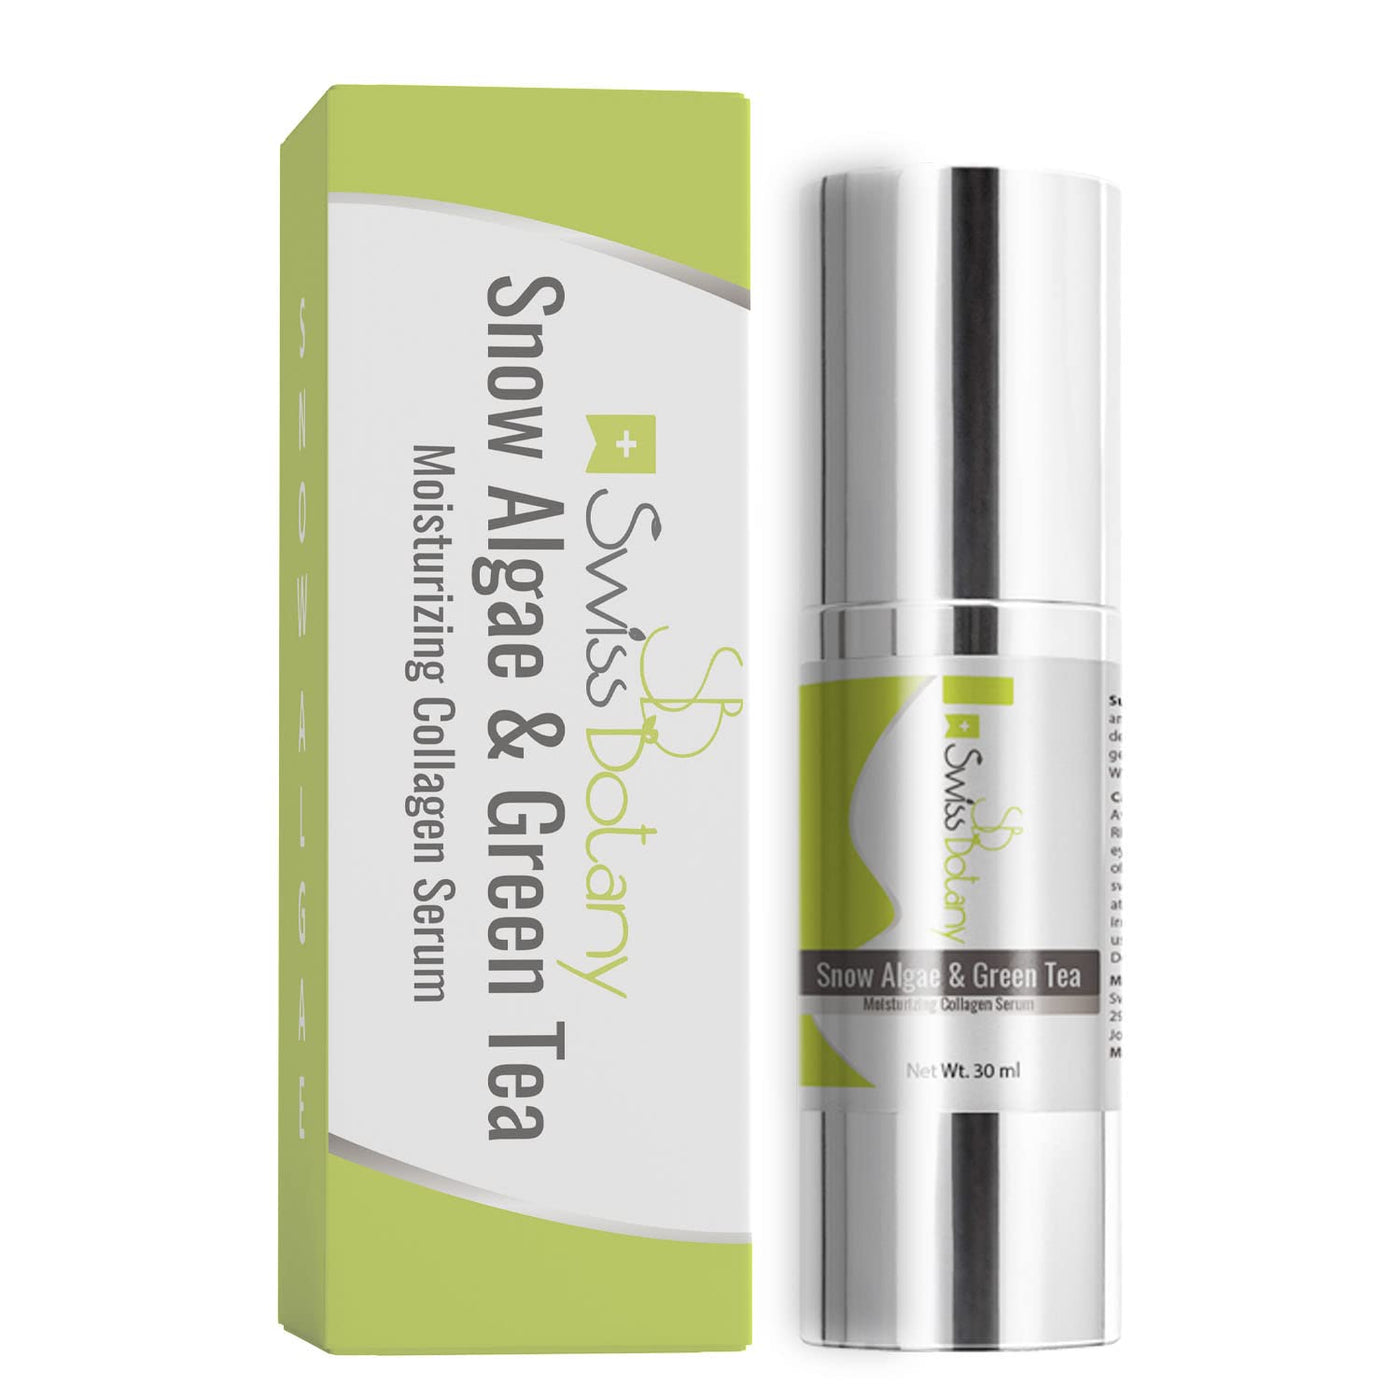 Swiss Botany Beauty 1 / Medicinal Snow Algae & Green Tea Moisturizing Collagen Serum, Improves Elasticity Evens Skin Tone, Anti-Aging Reduces Fine Lines Wrinkles Age Spots, All Skin Types | Premium Made by Swiss Botany, 30 mL